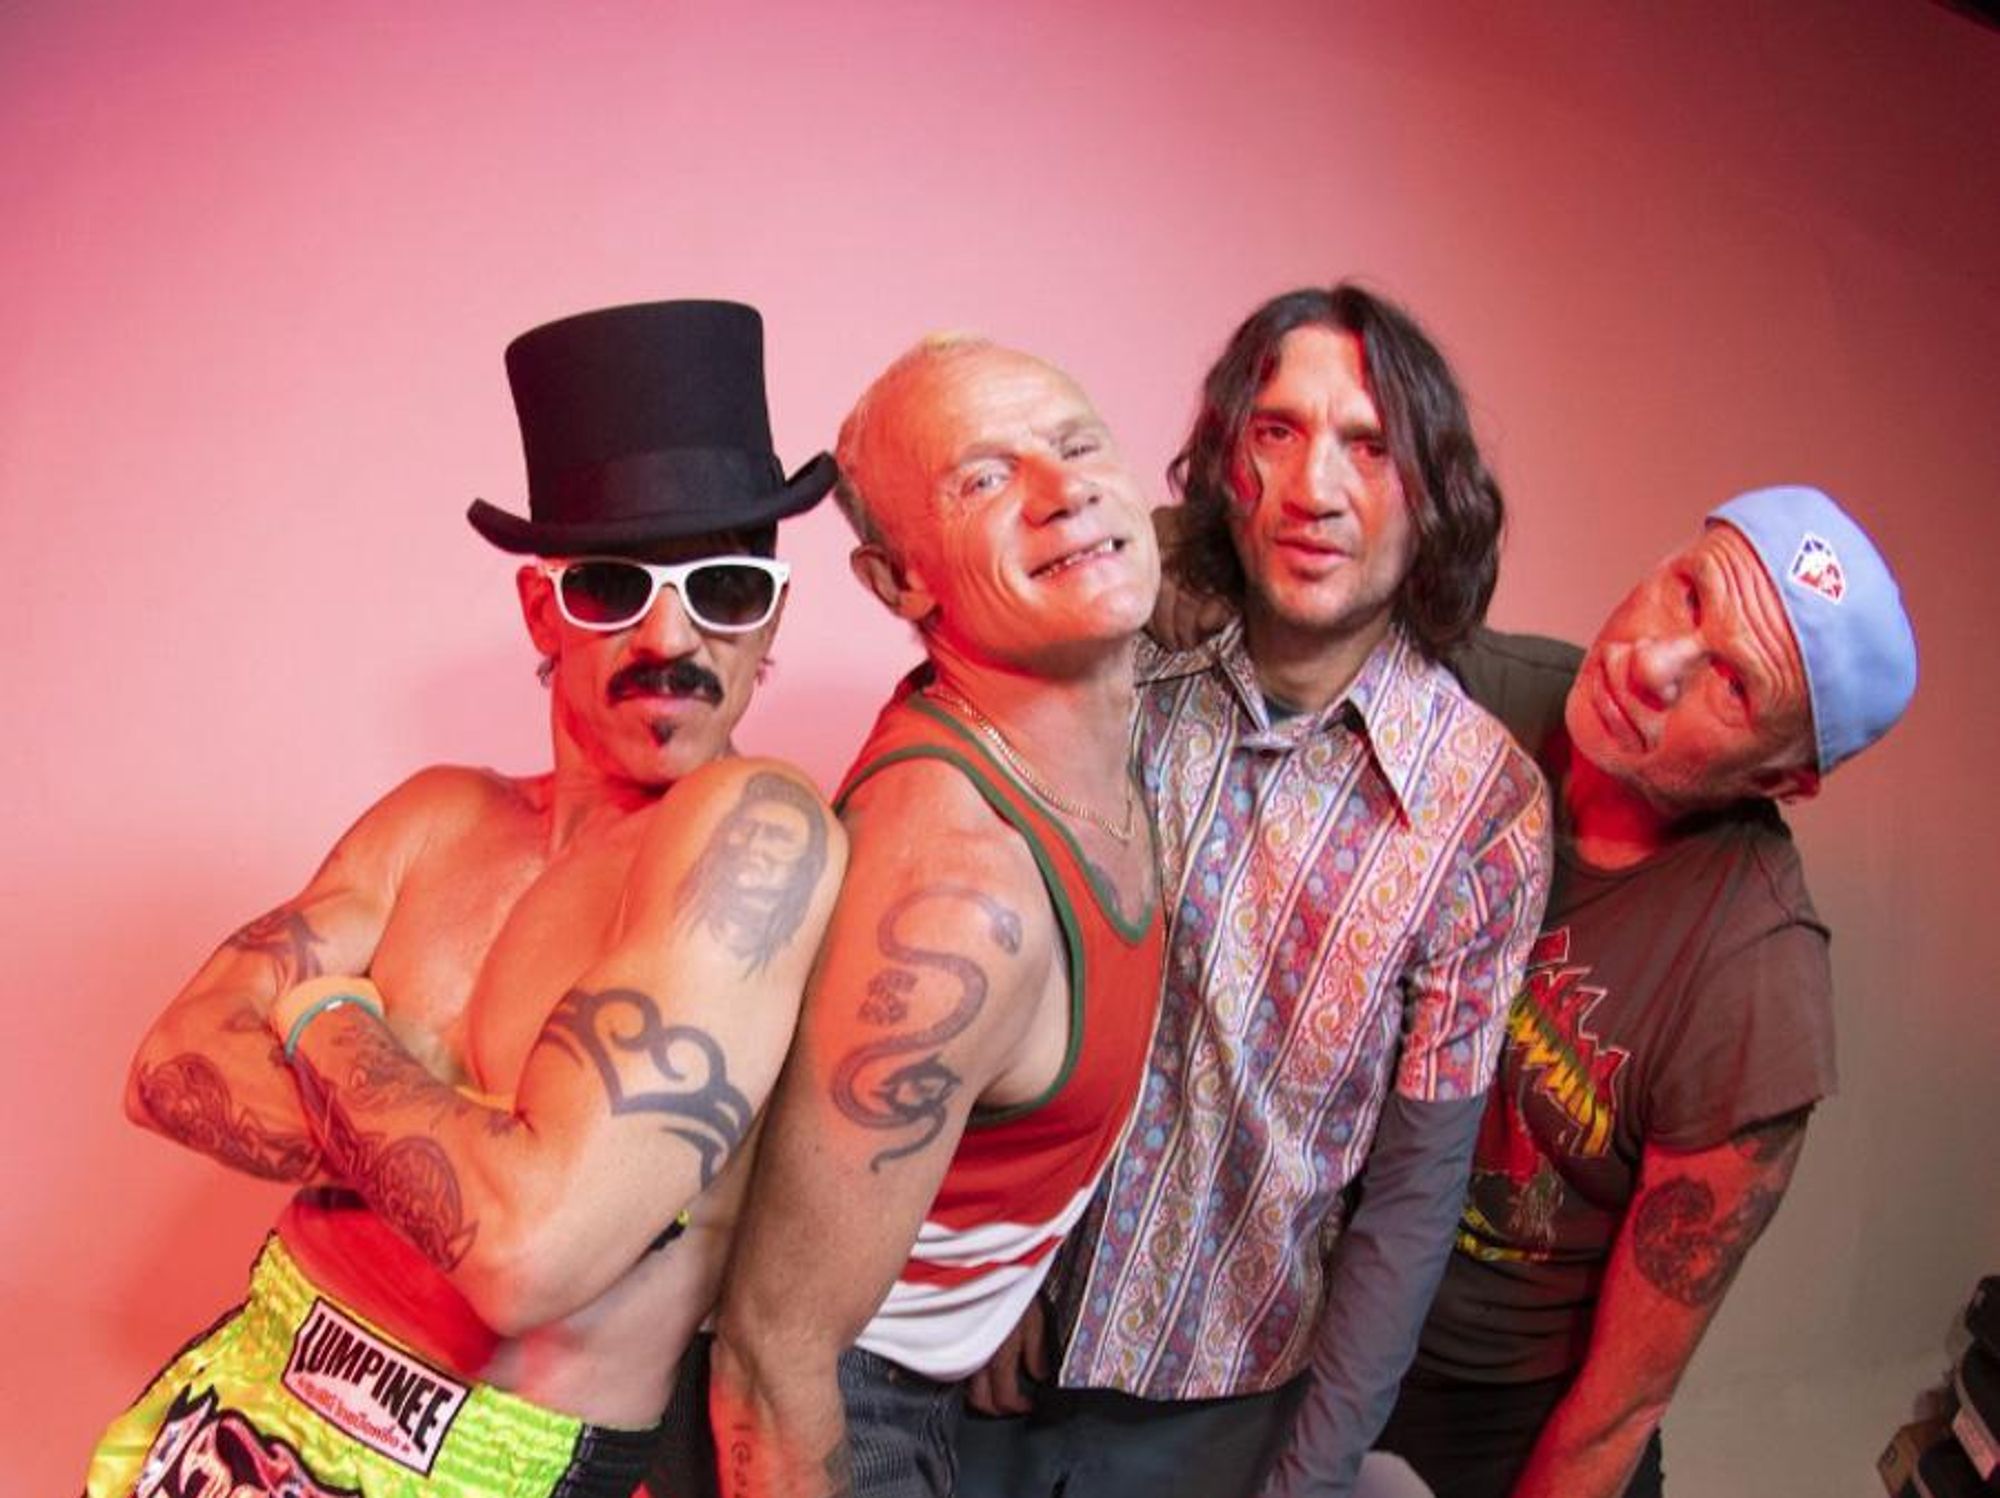 Red Hot Chili Peppers 2022